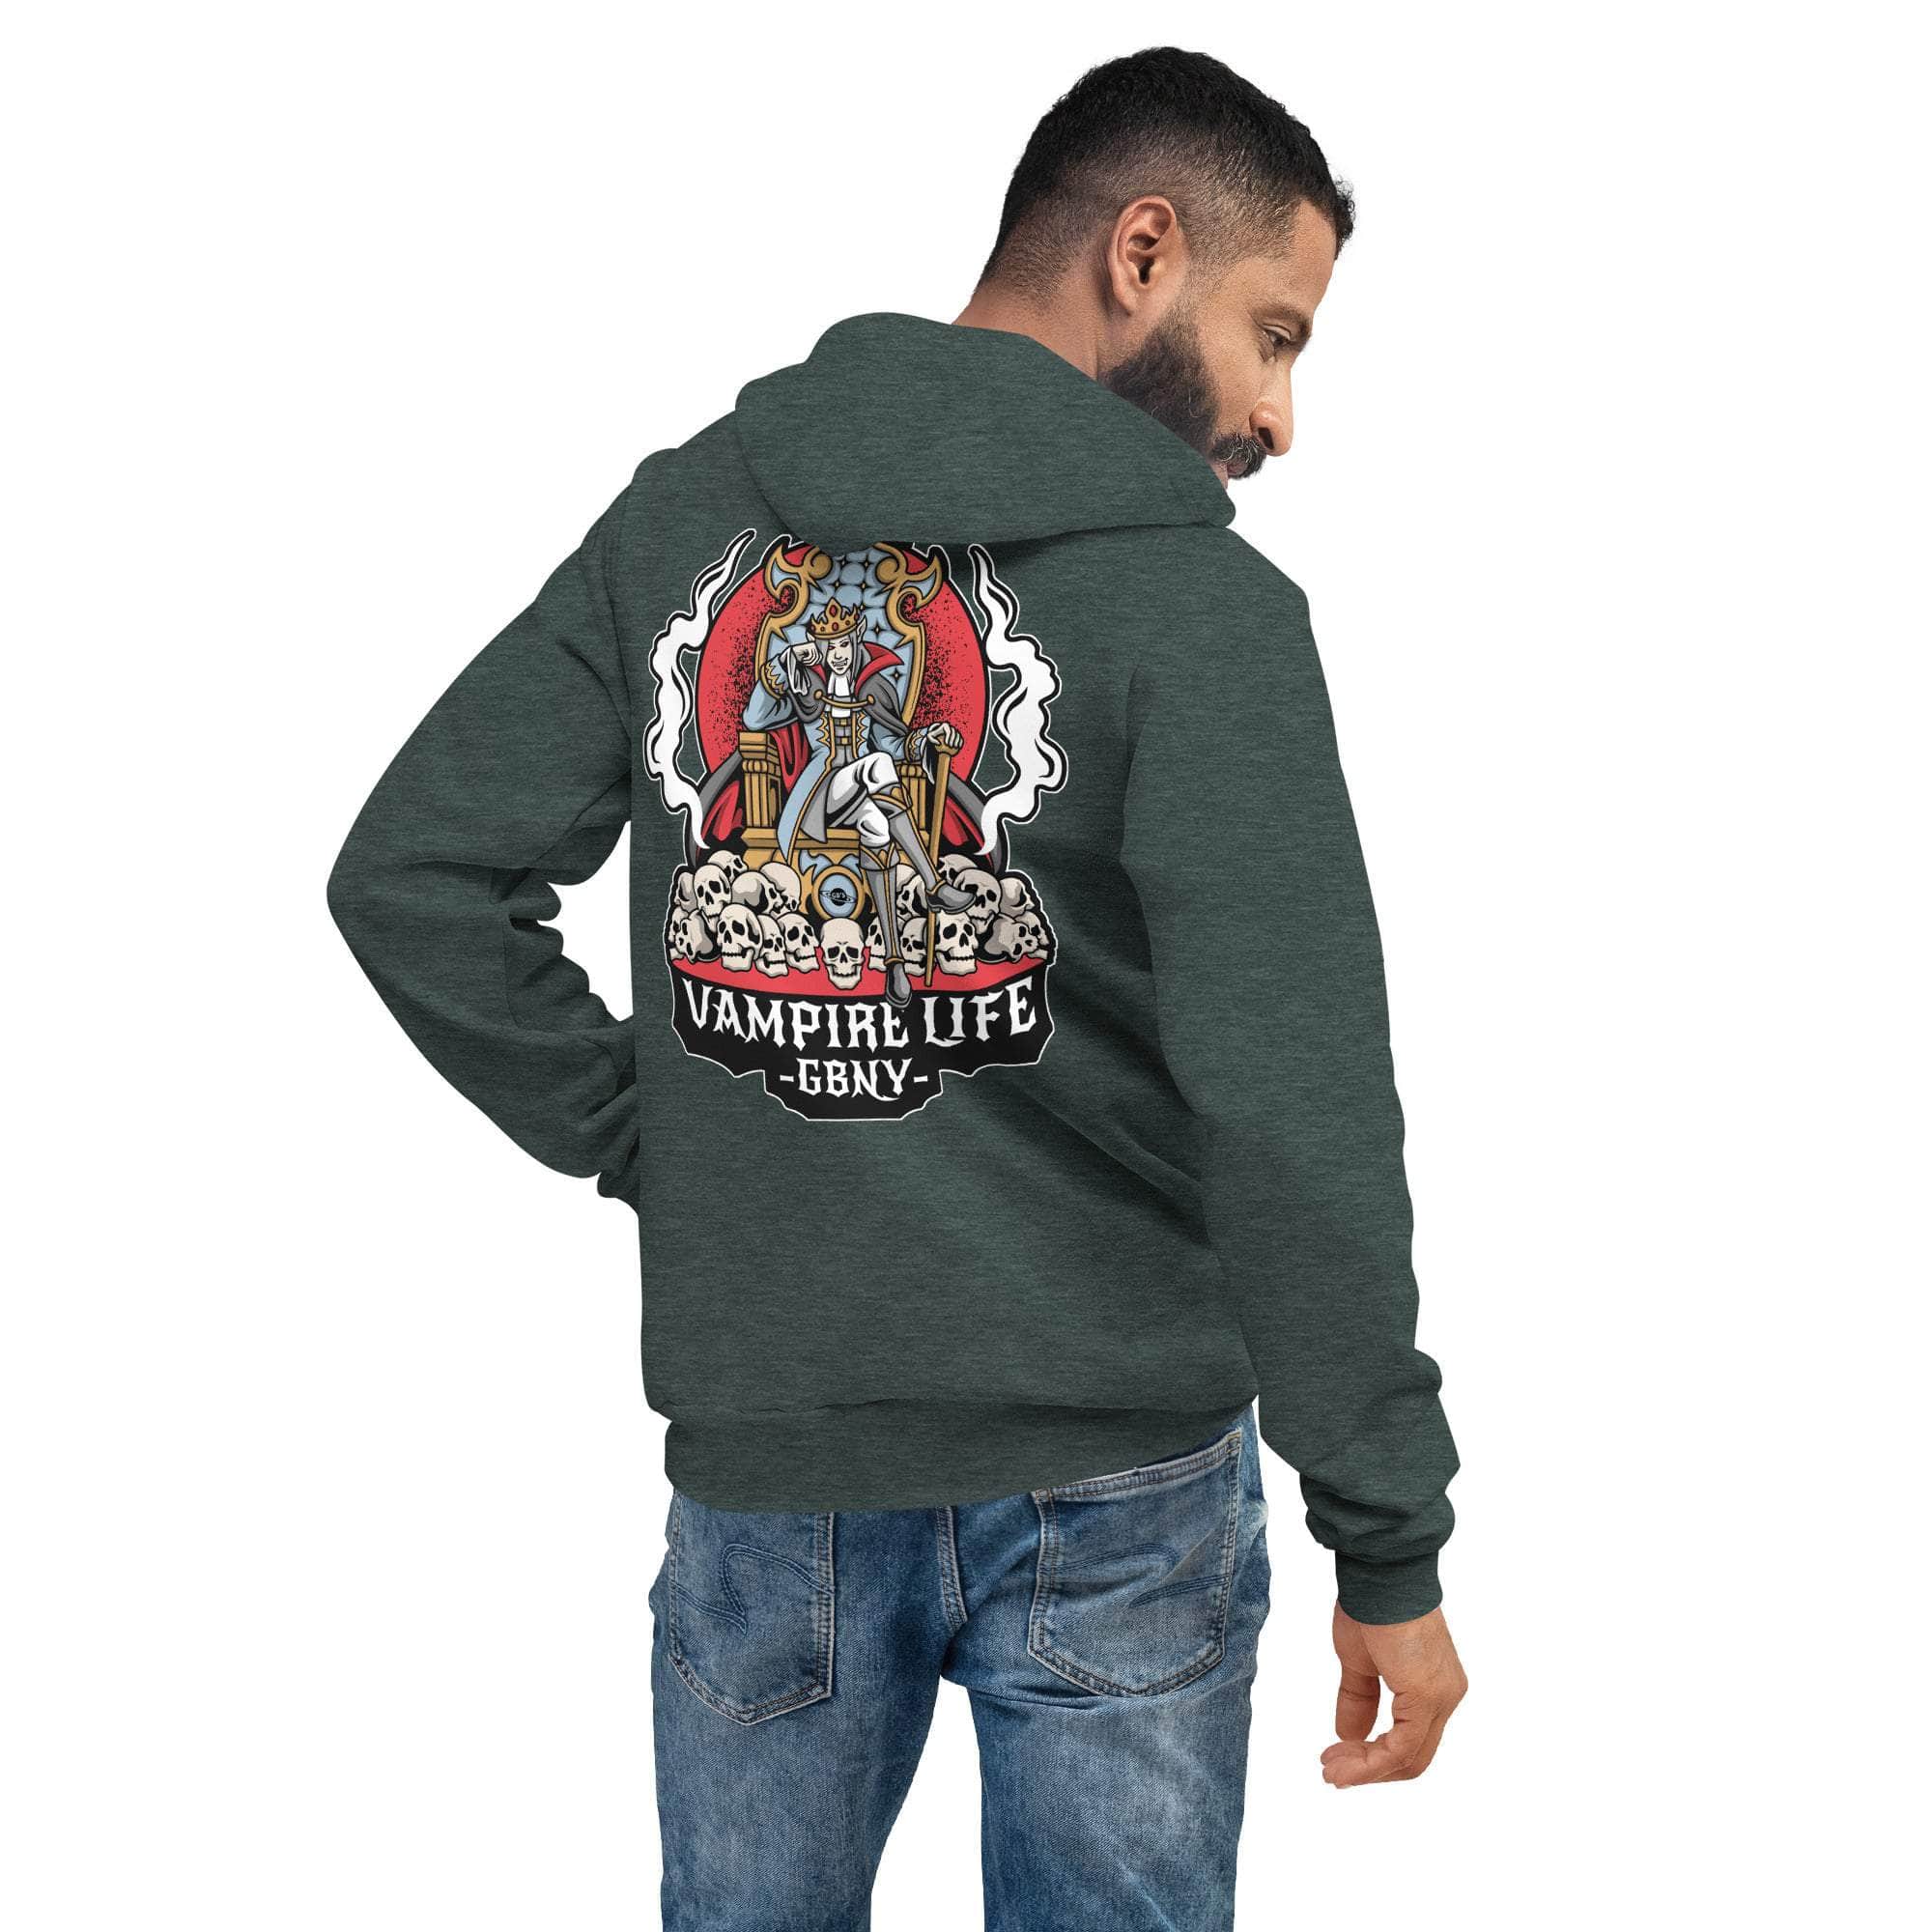 GBNY Heather Forest / S Vamp Life X GBNY "Royal Vampire" Super Soft Hoodie - Men's 5737869_9245